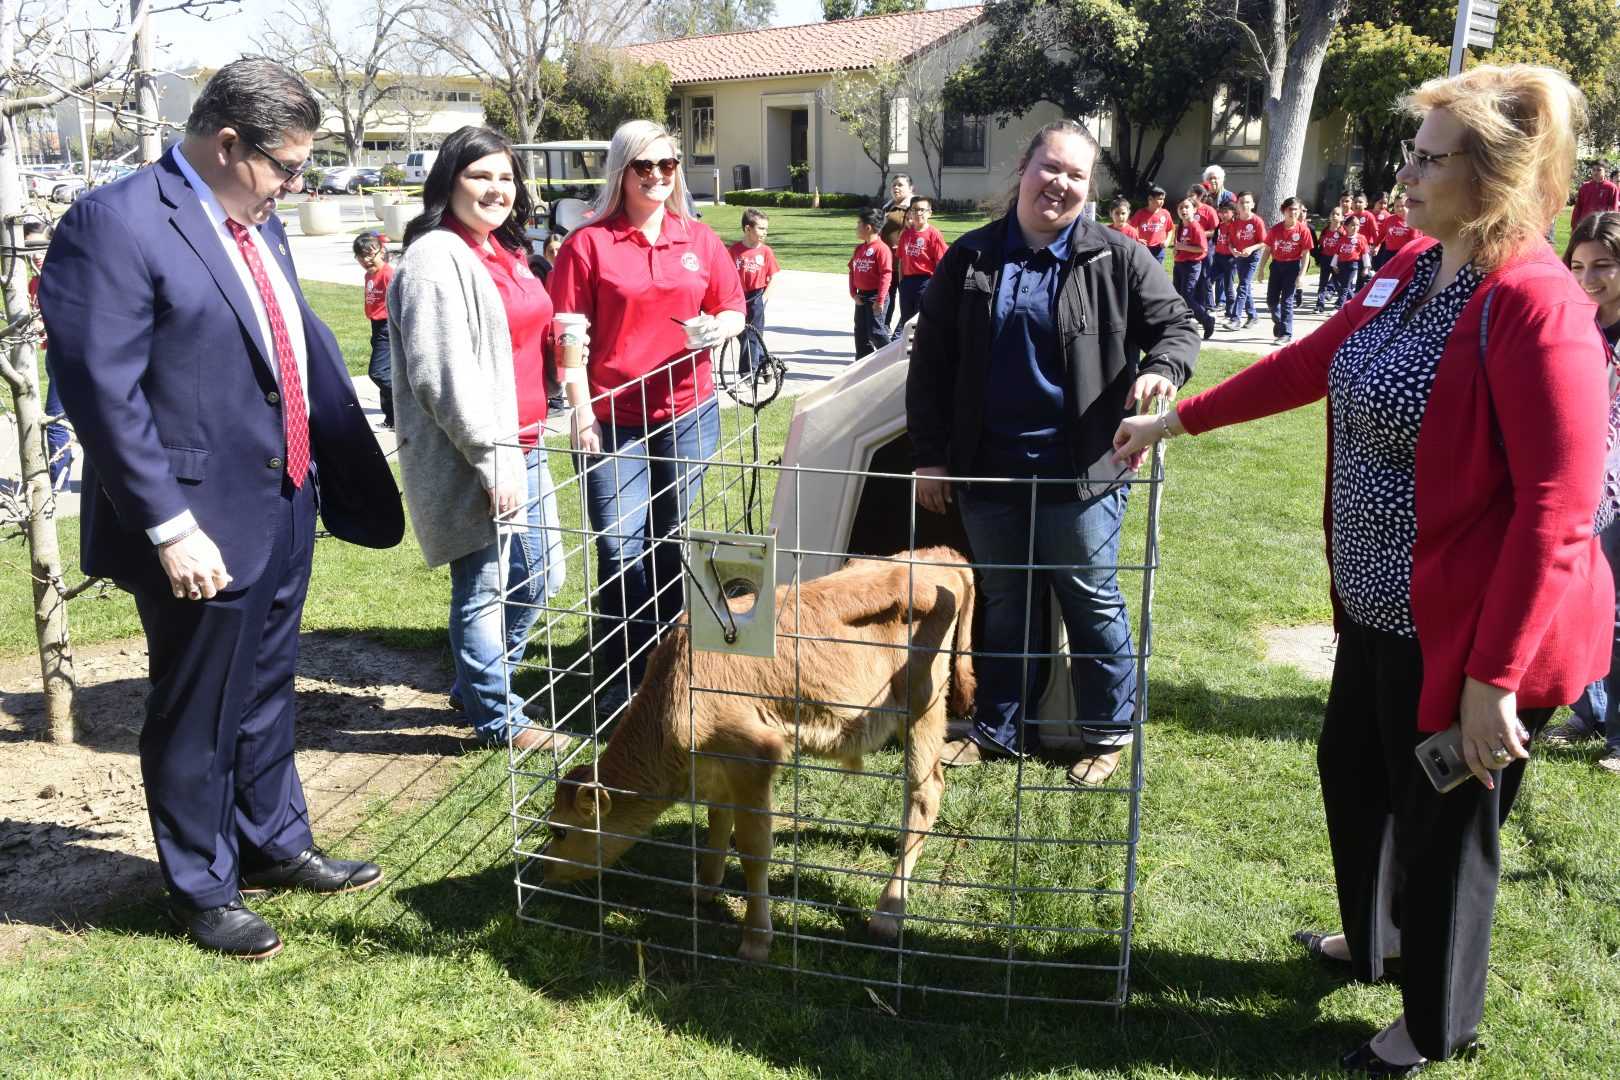 Fresno State President Dr. Joseph I. Castro and his wife Mary obsvere a livestock exhibit during National Ag Day on Thursday, March 14, 2019. (Geoff Thurne/Jordan College of Agricultural Sciences and  Technology)